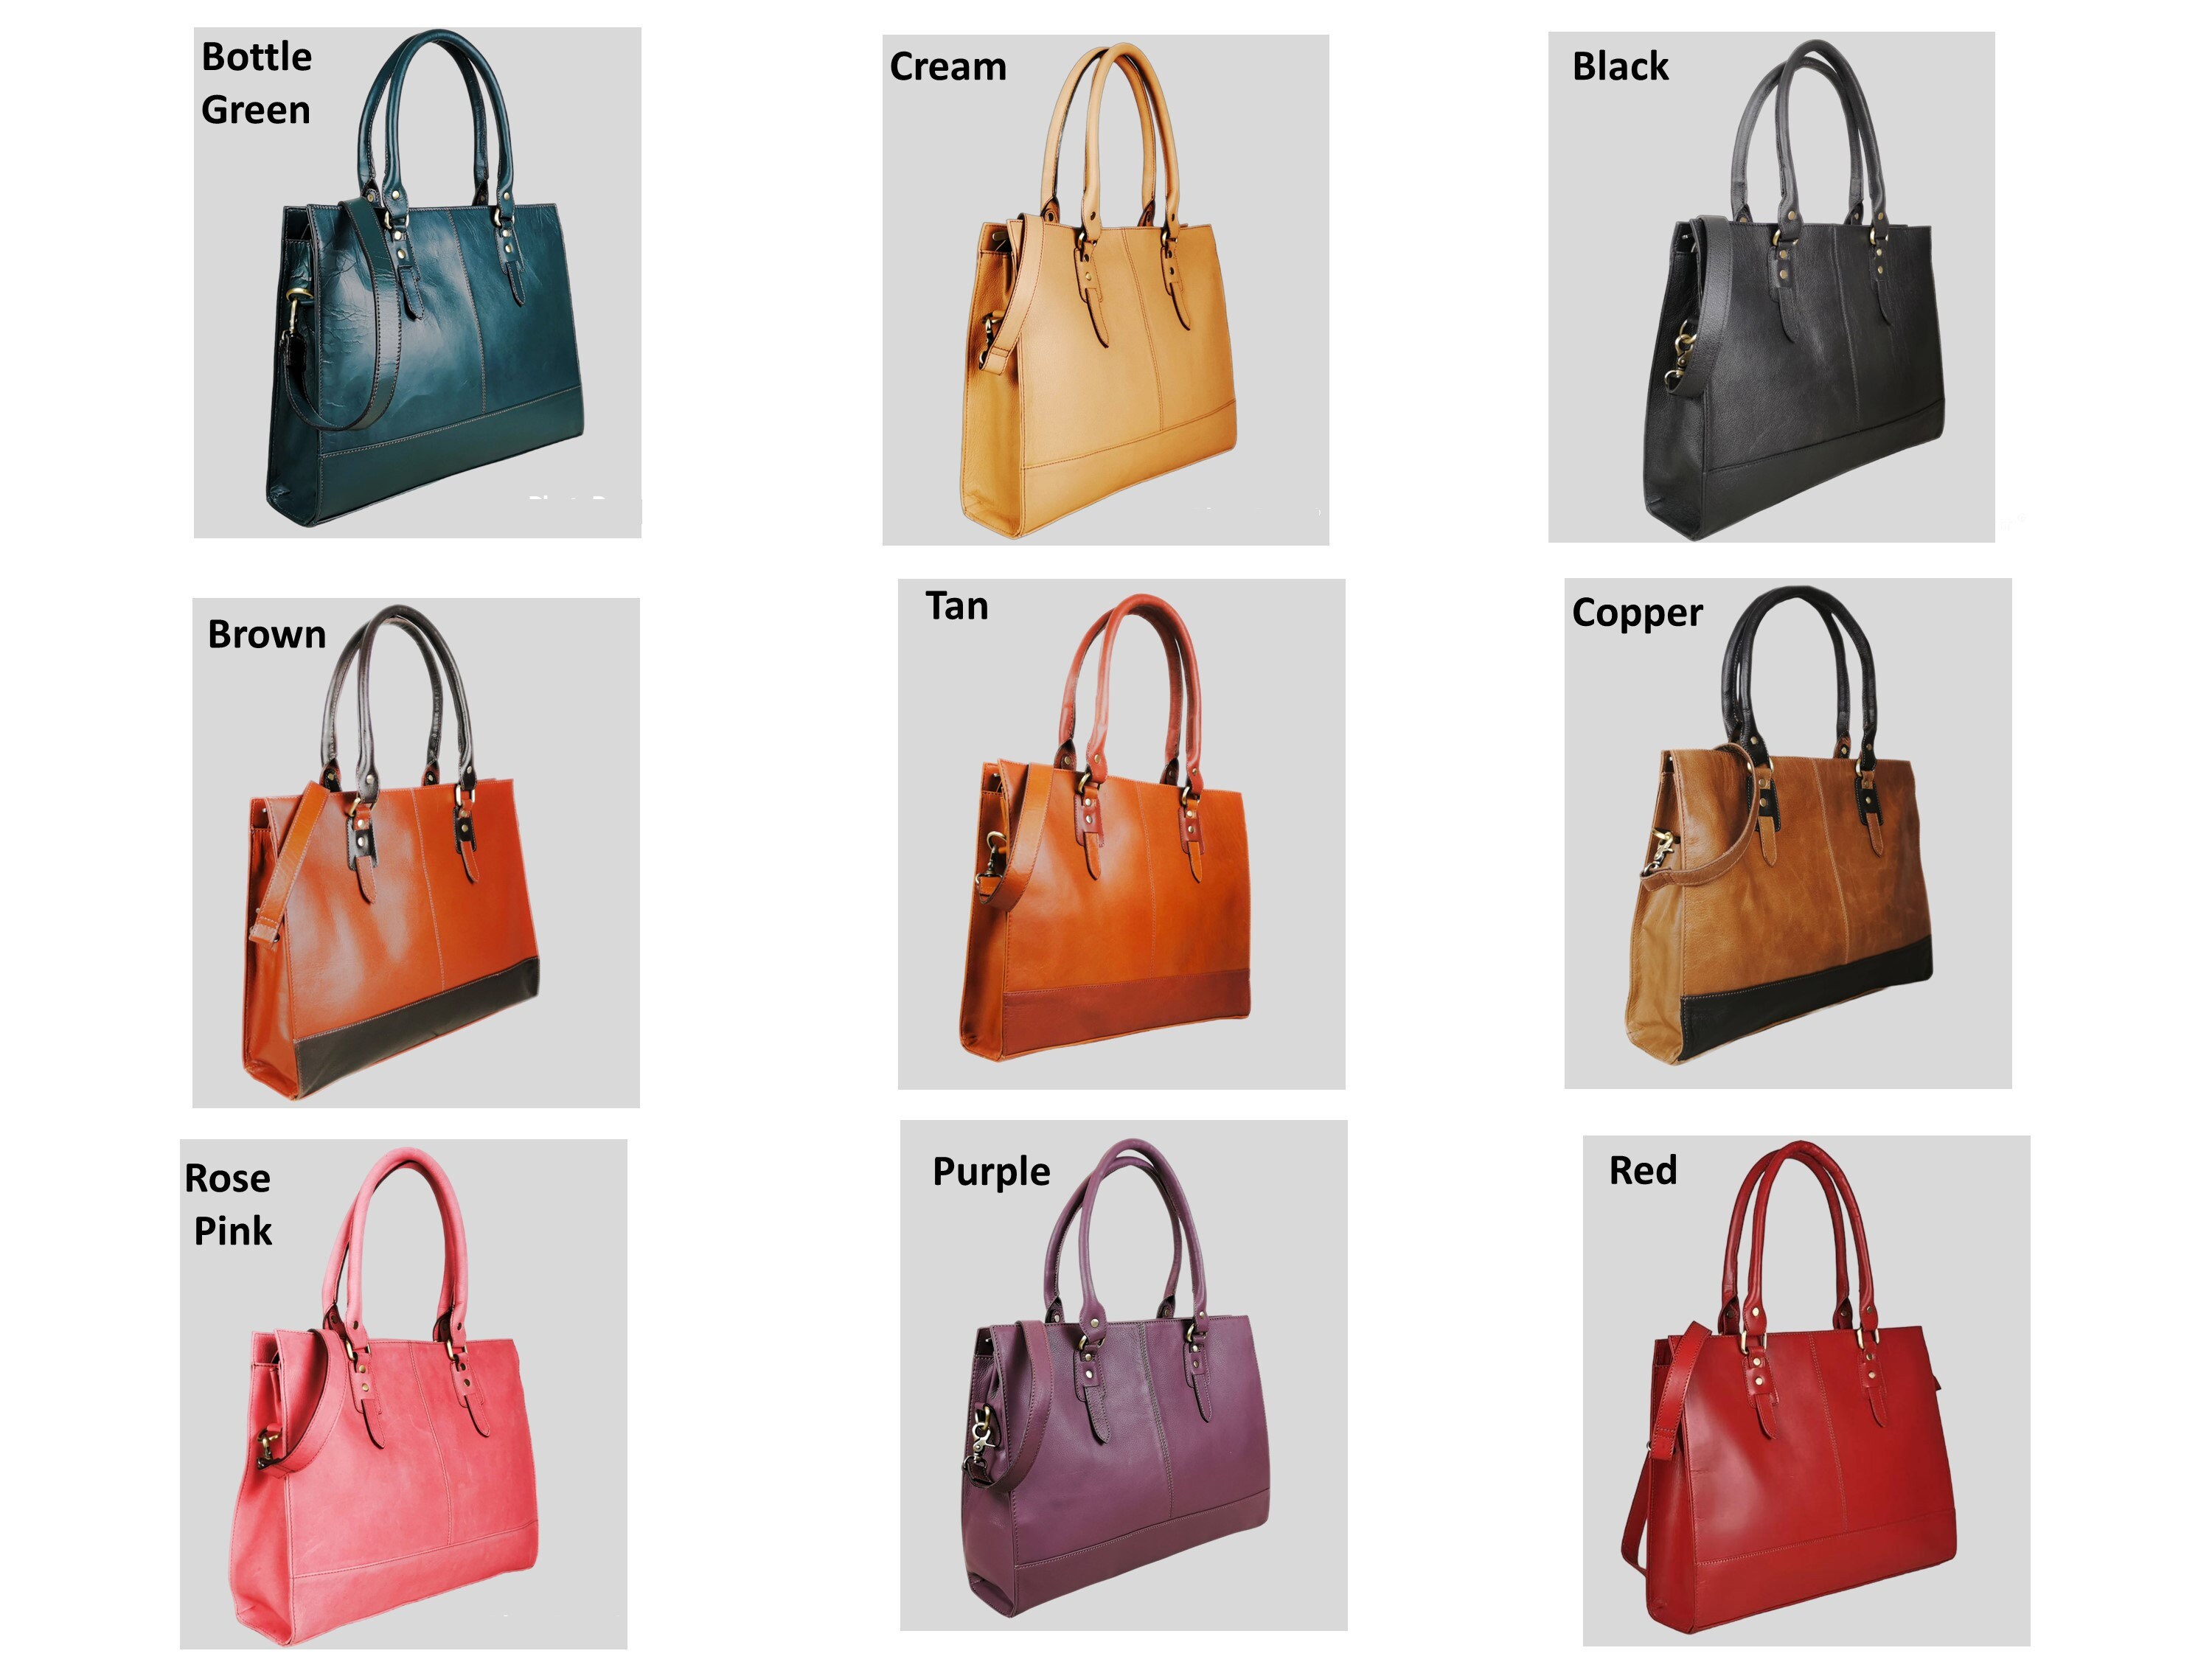 Chic Laptop Bags For Women: Essential Must-Haves For The Office Fashionista  - Cherry Colors - Cosmetics Heaven!